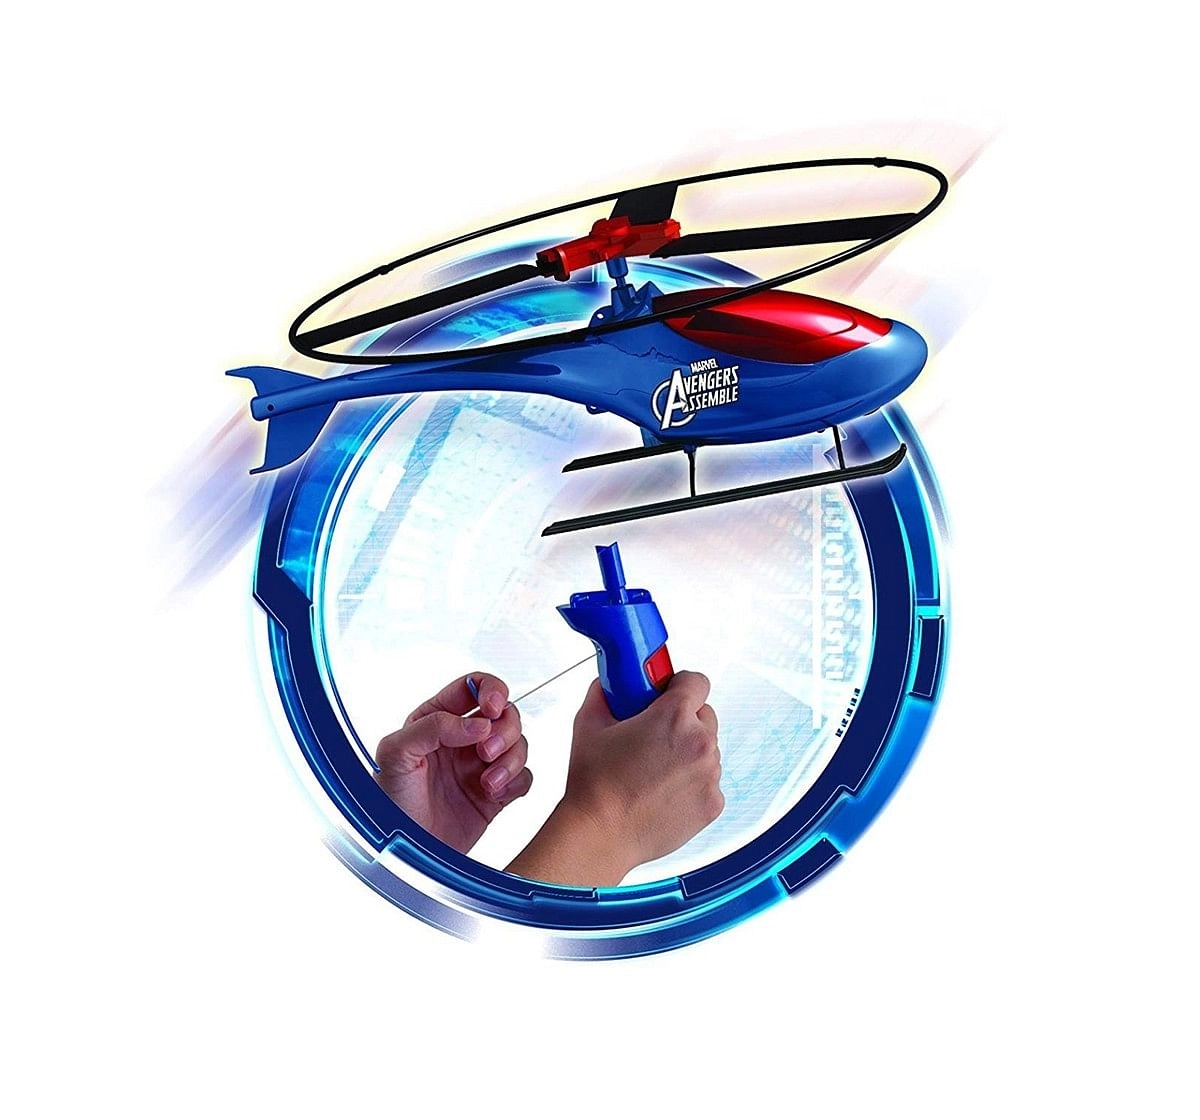 Marvel Avengers Rescue Helicopter Vehicles for Kids age 3Y+ 